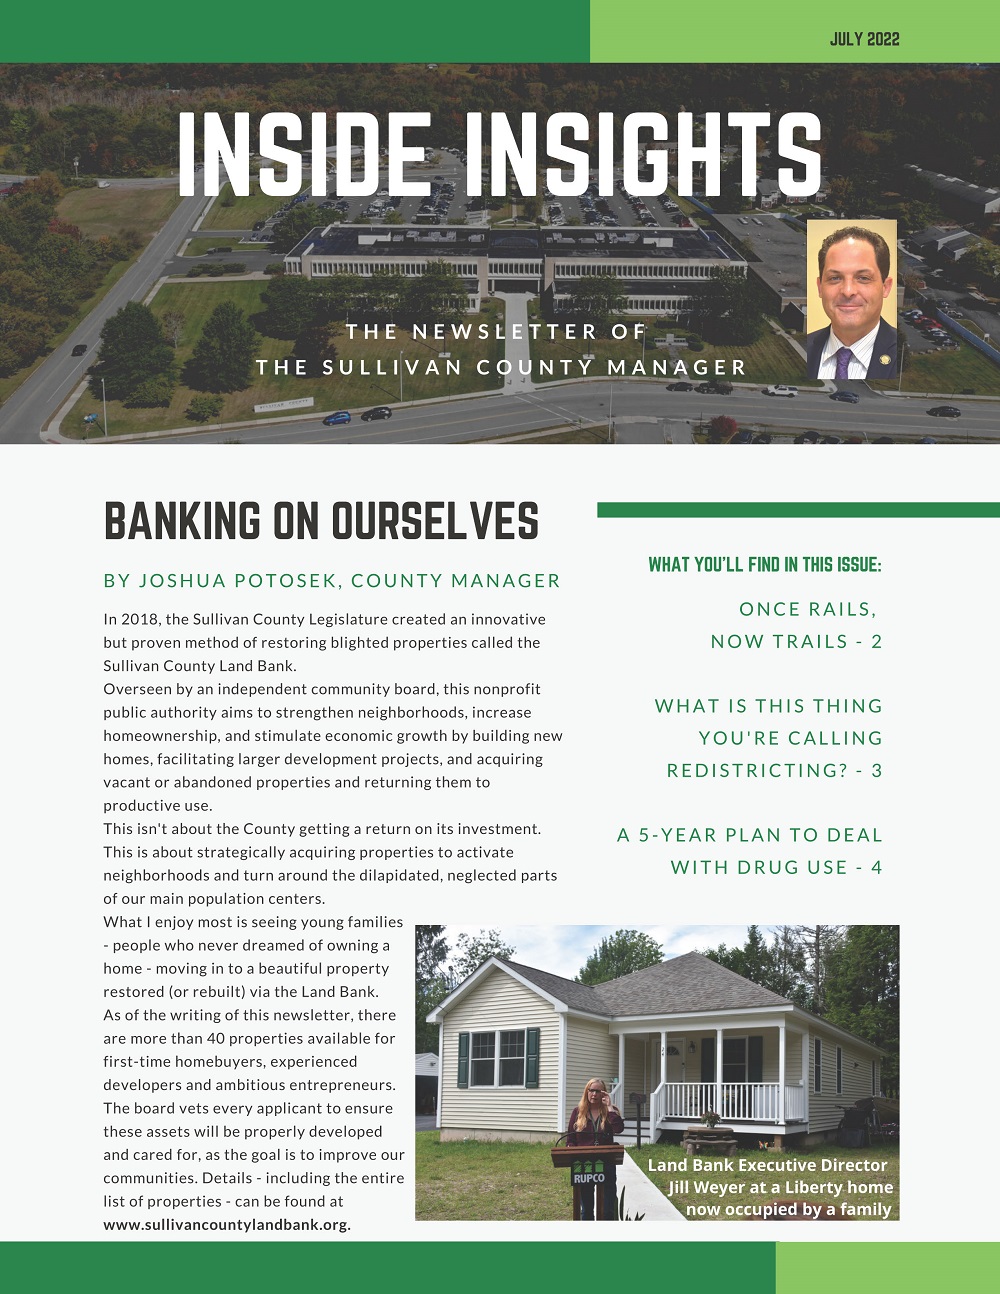 July 2022 Sullivan County Manager's Newsletter